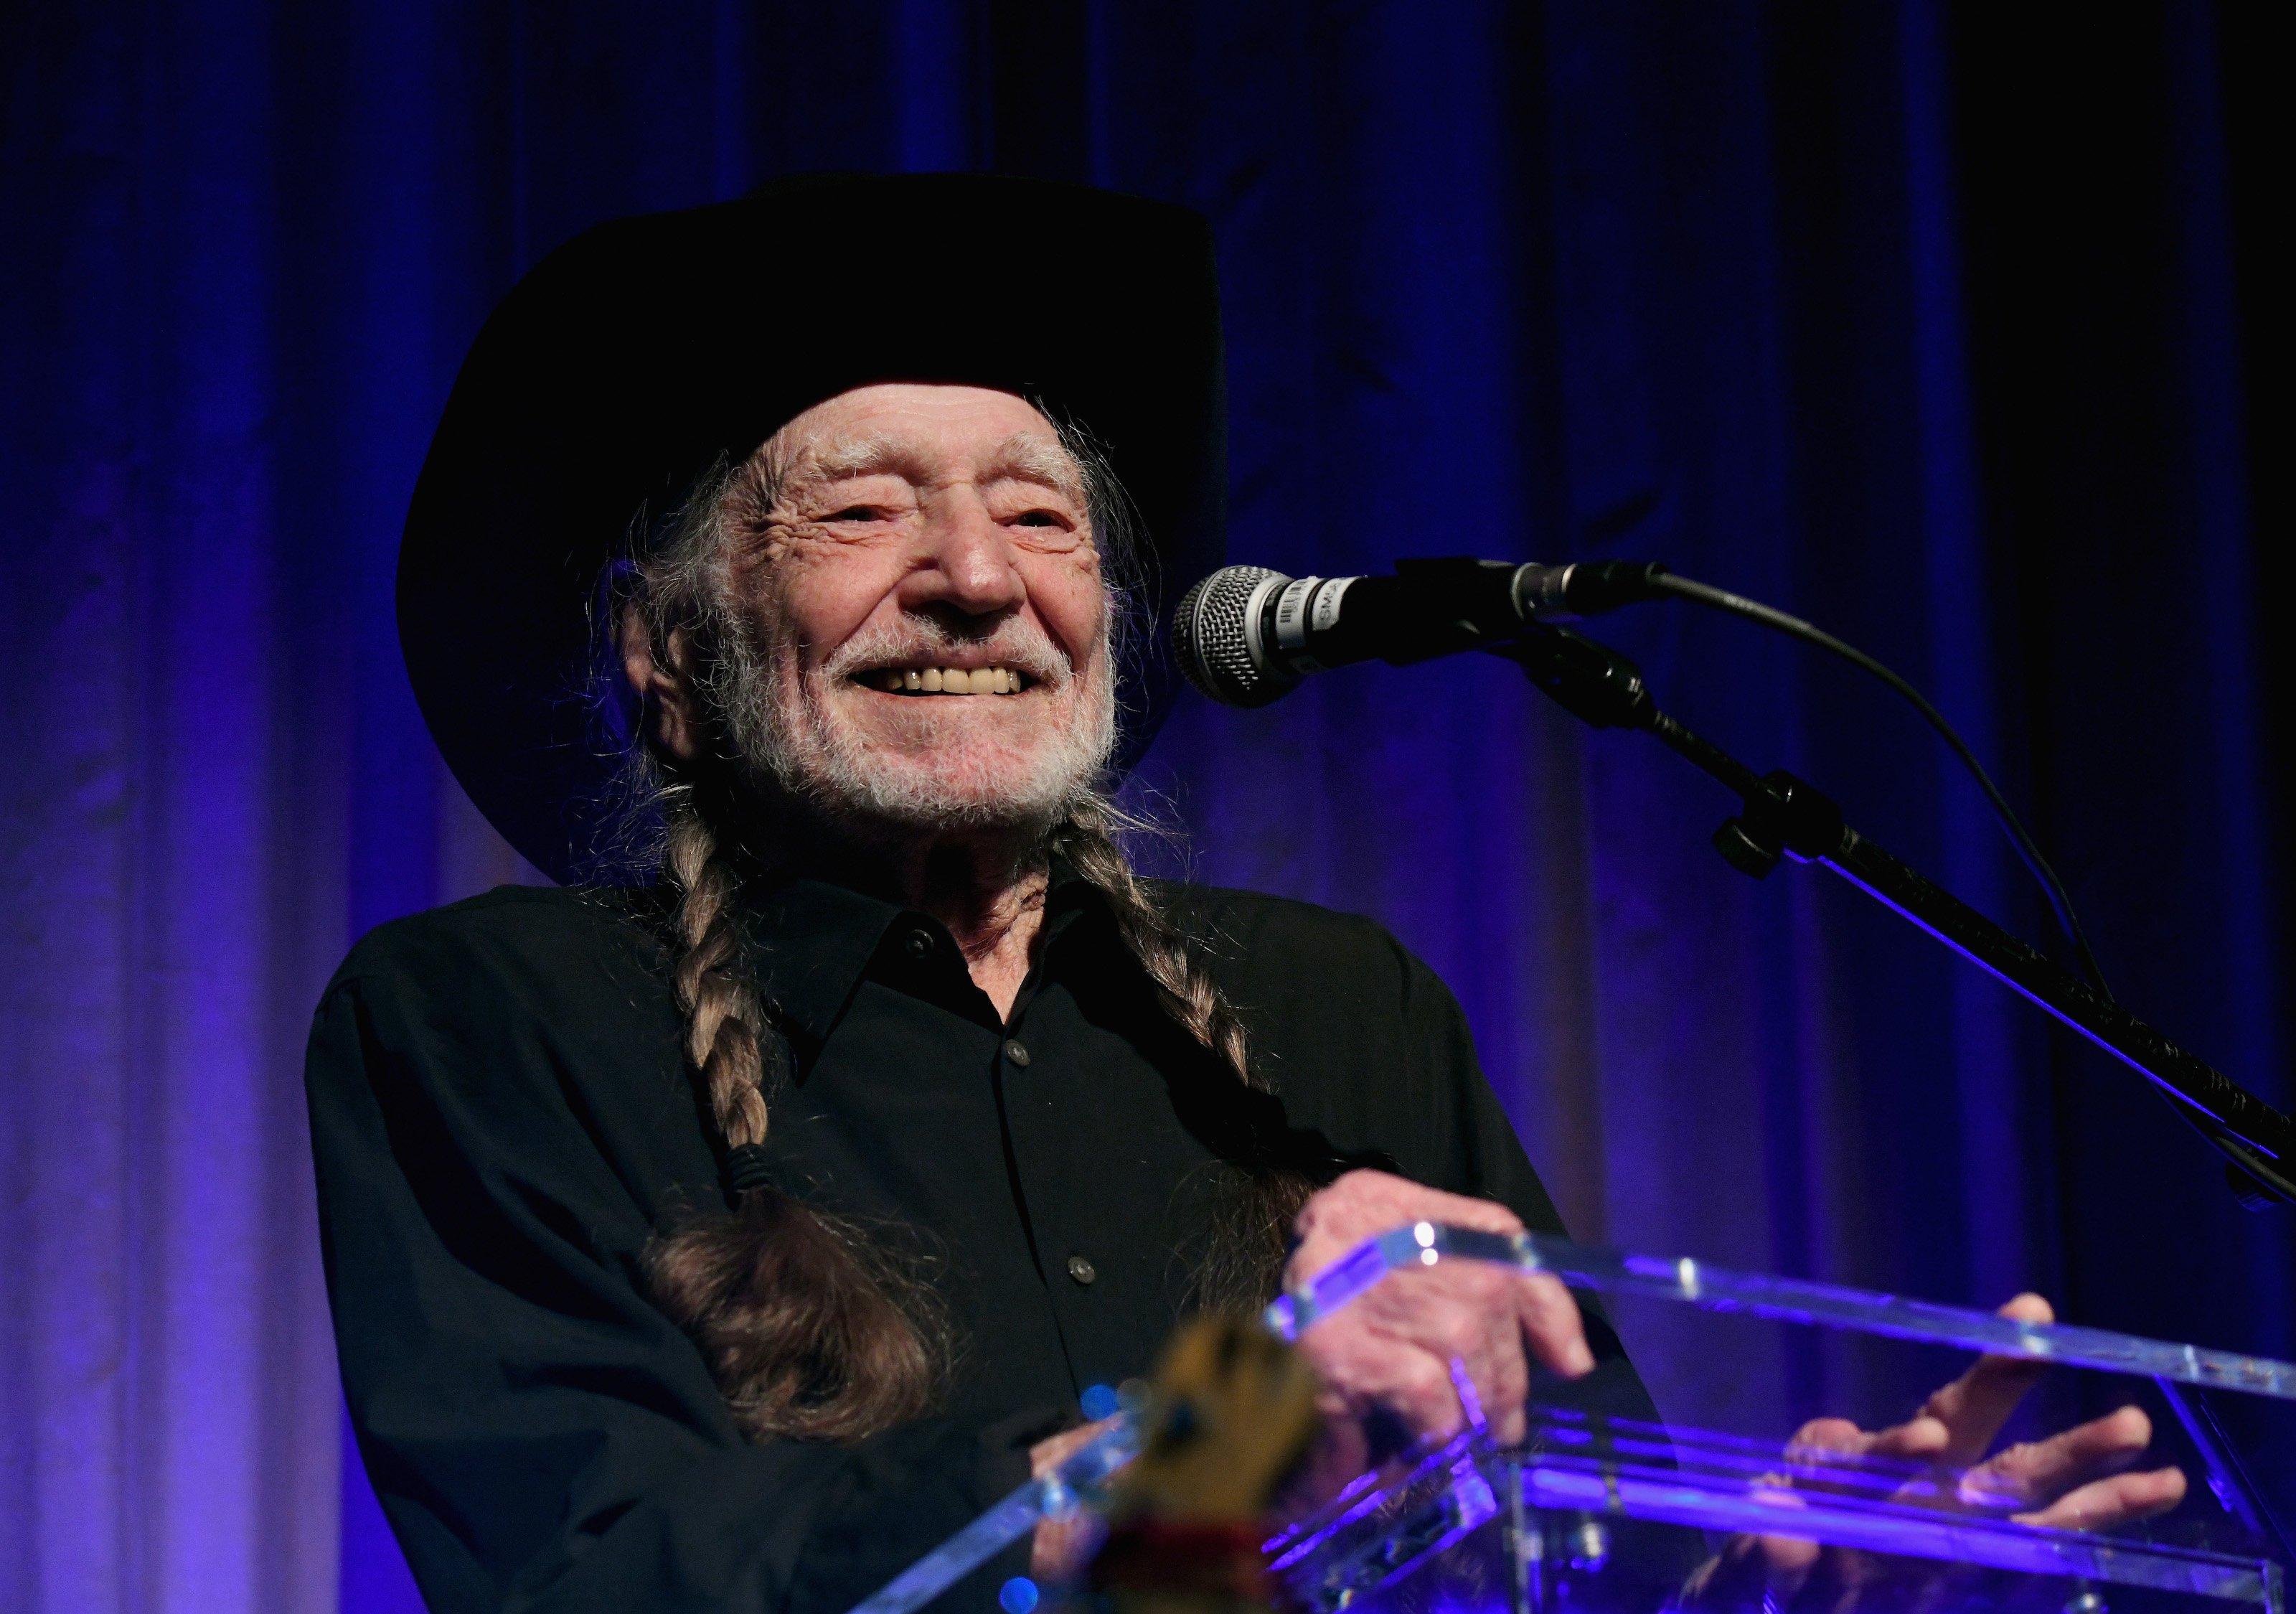 Photo of Willie Nelson winning the GRAMMY for Best Country Album at the 2023 GRAMMYs.